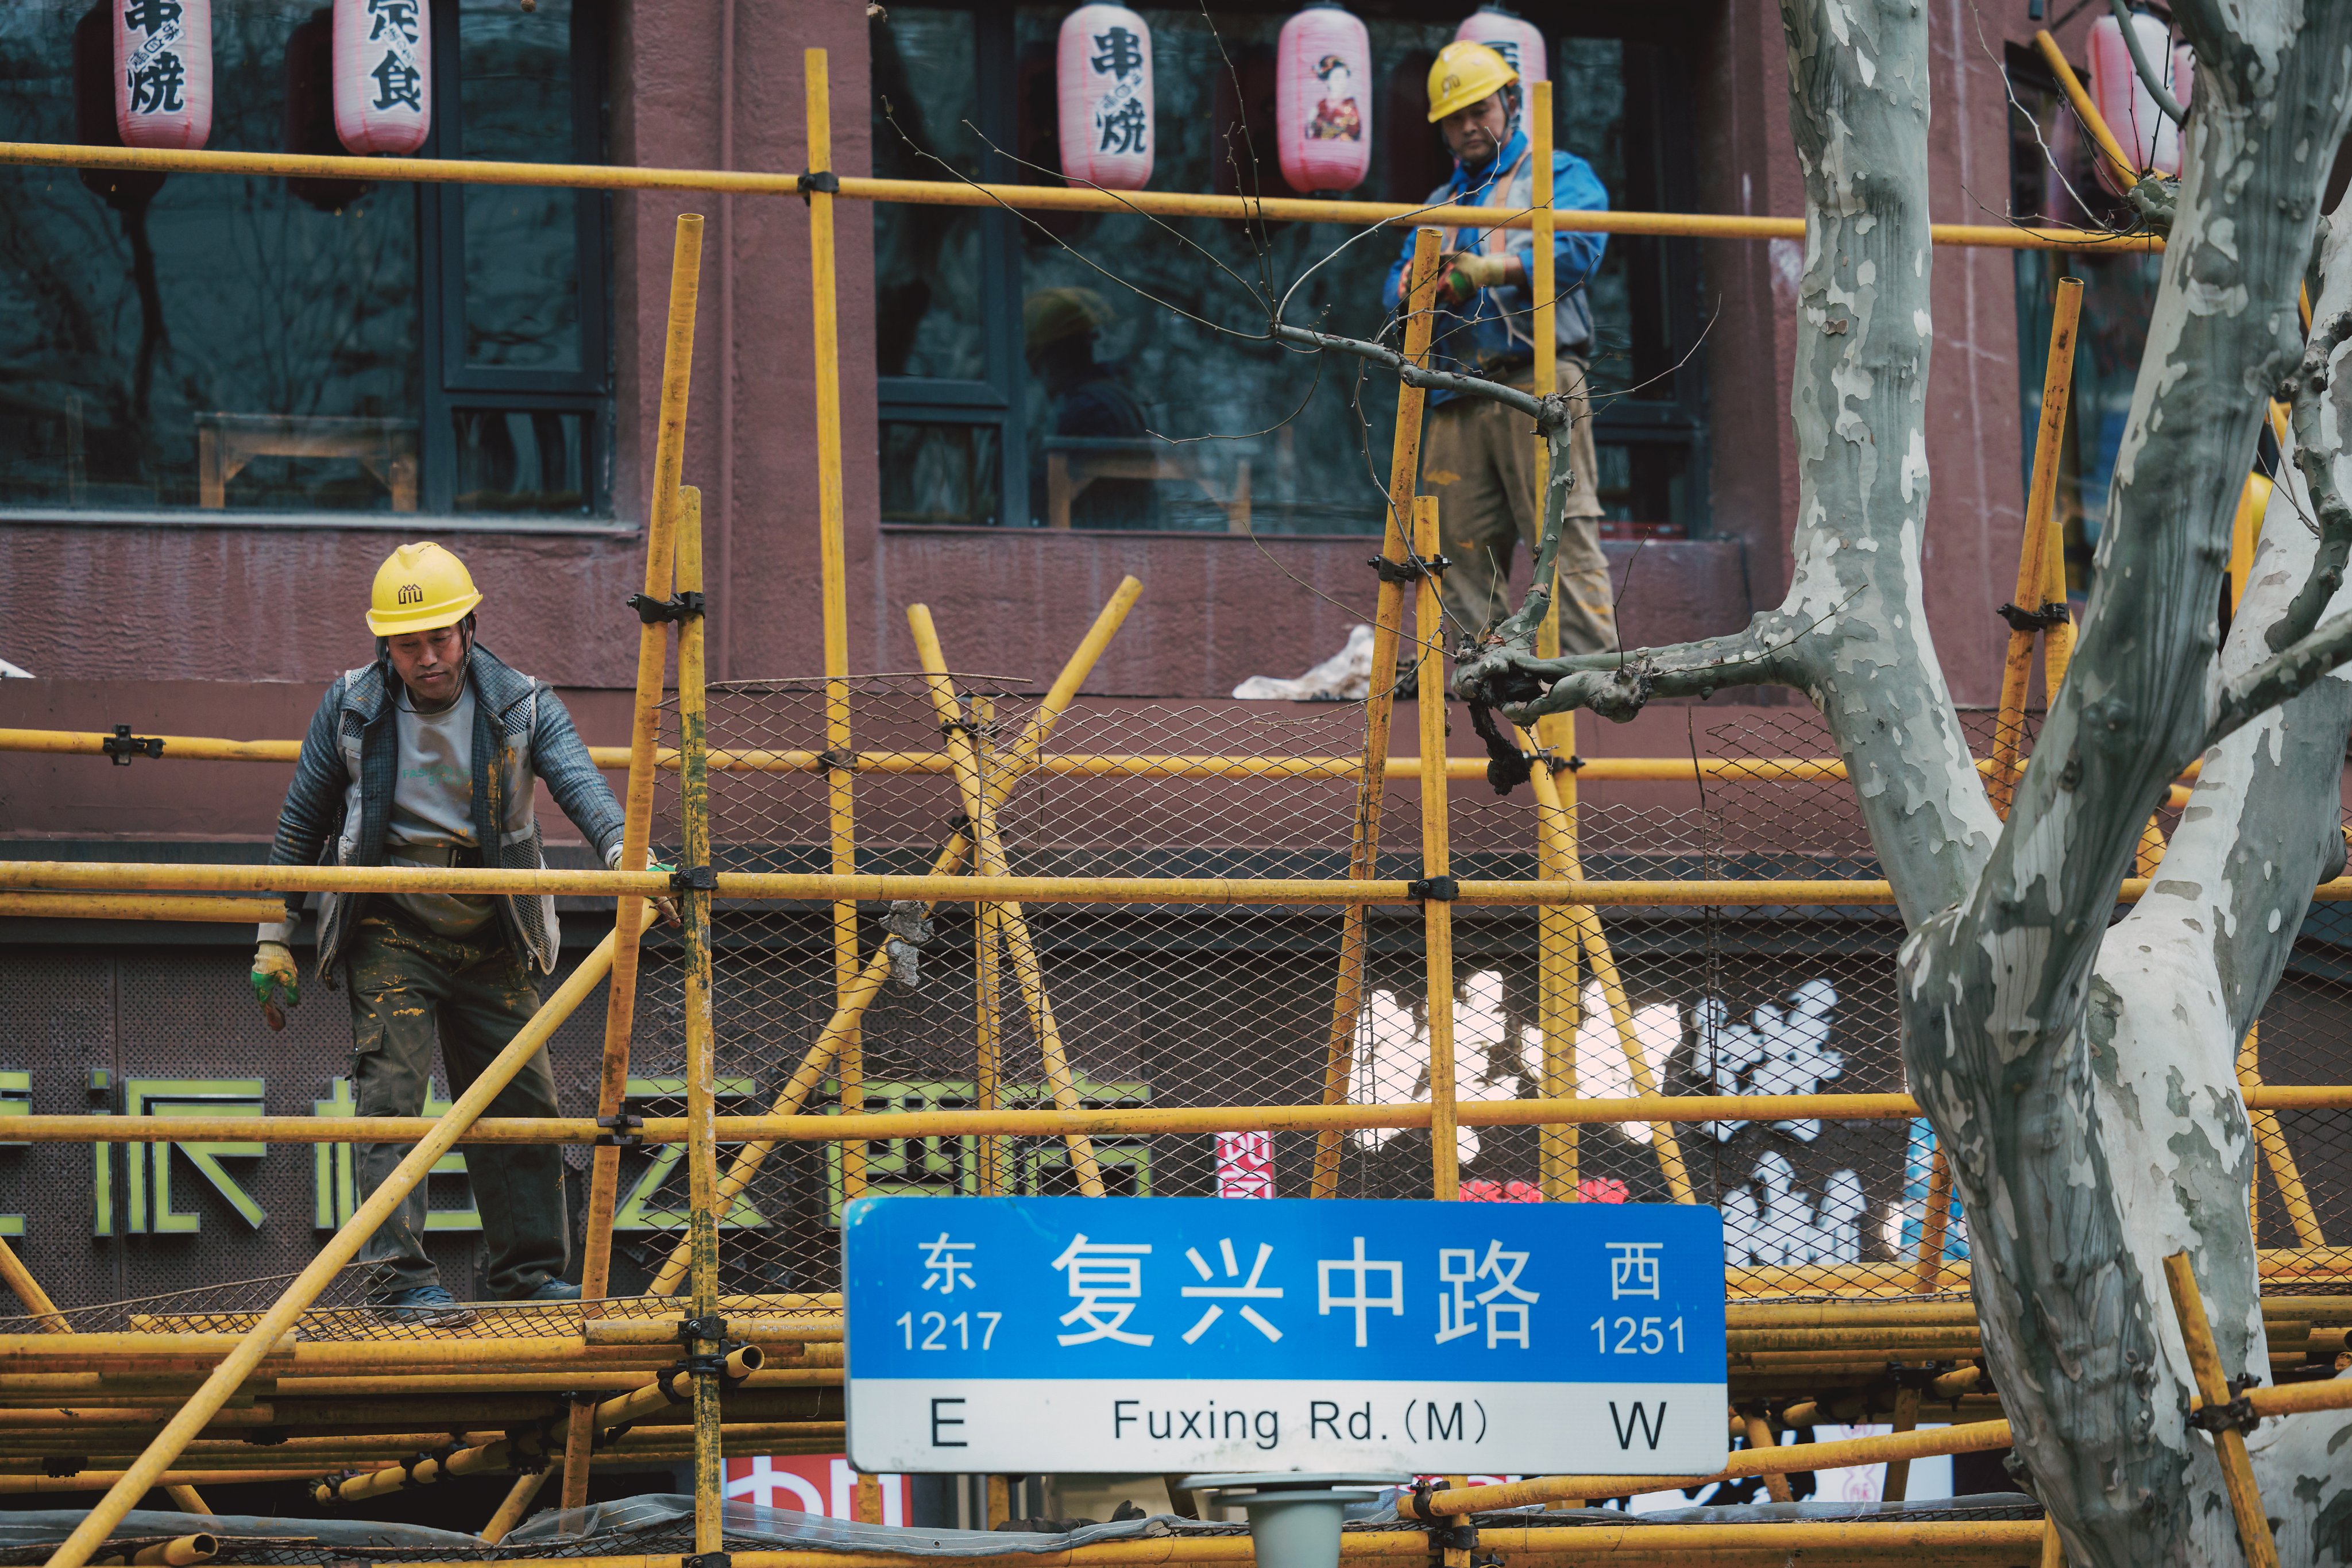 Labourers work on a construction site in Shanghai on March 27. According to the National Bureau of Statistics, China’s industrial firms saw a 10.2 per cent year-on-year increase in profits during the first two months of 2024, suggesting the Chinese economy is starting to recover, thanks to Beijing’s support measures. Photo: EPA-EFE